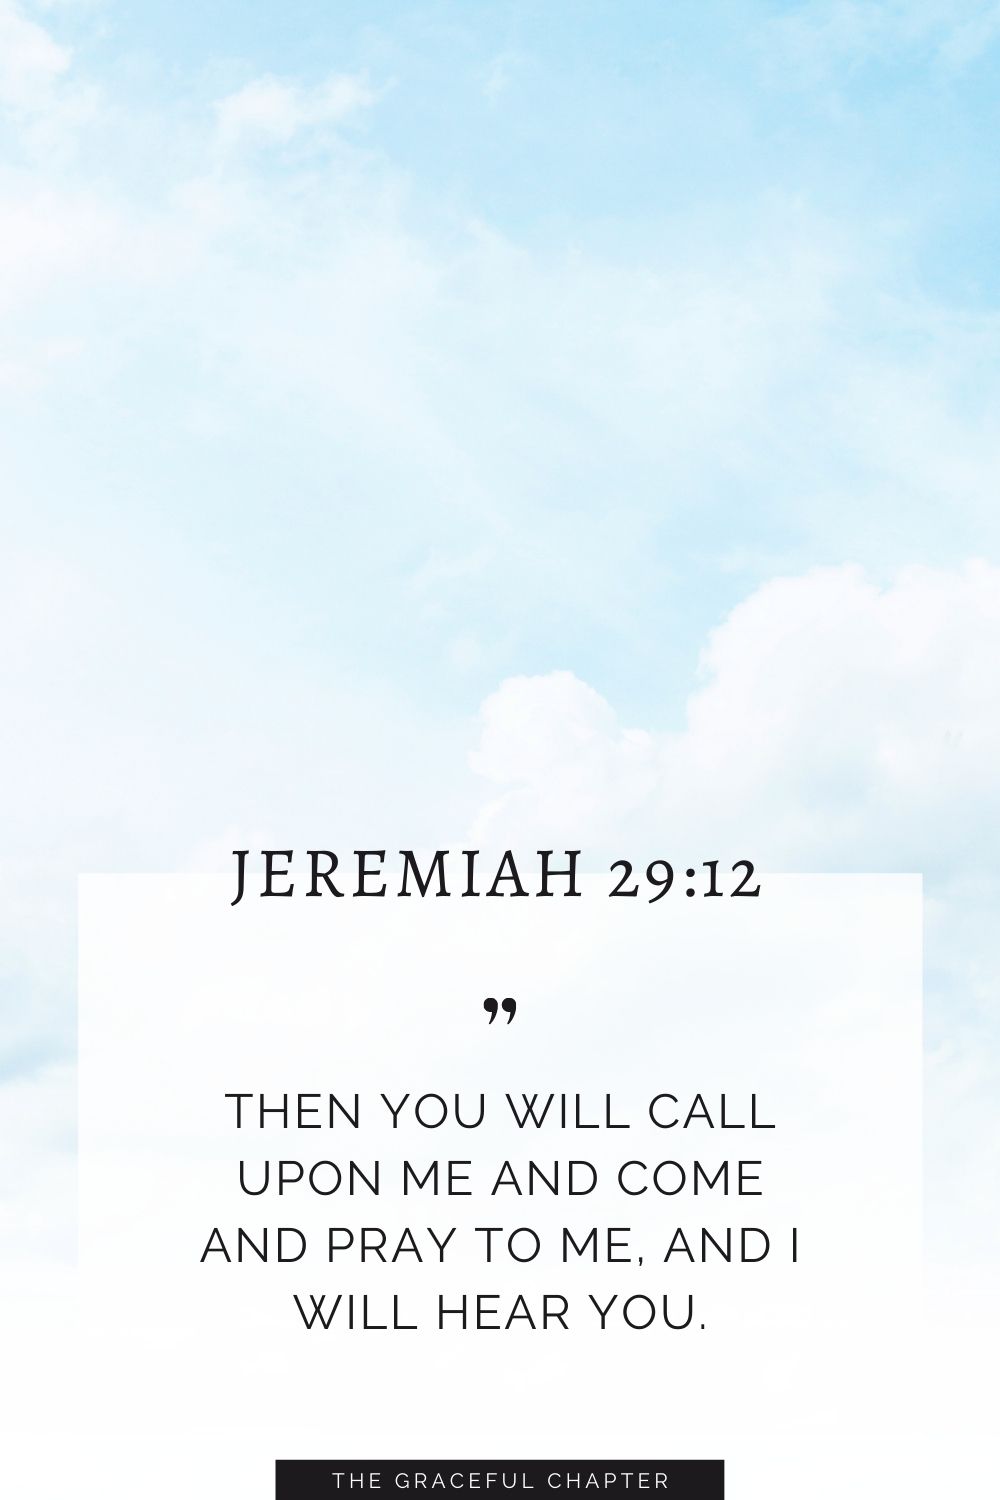 Then you will call upon me and come and pray to me, and I will hear you. Jeremiah 29:12